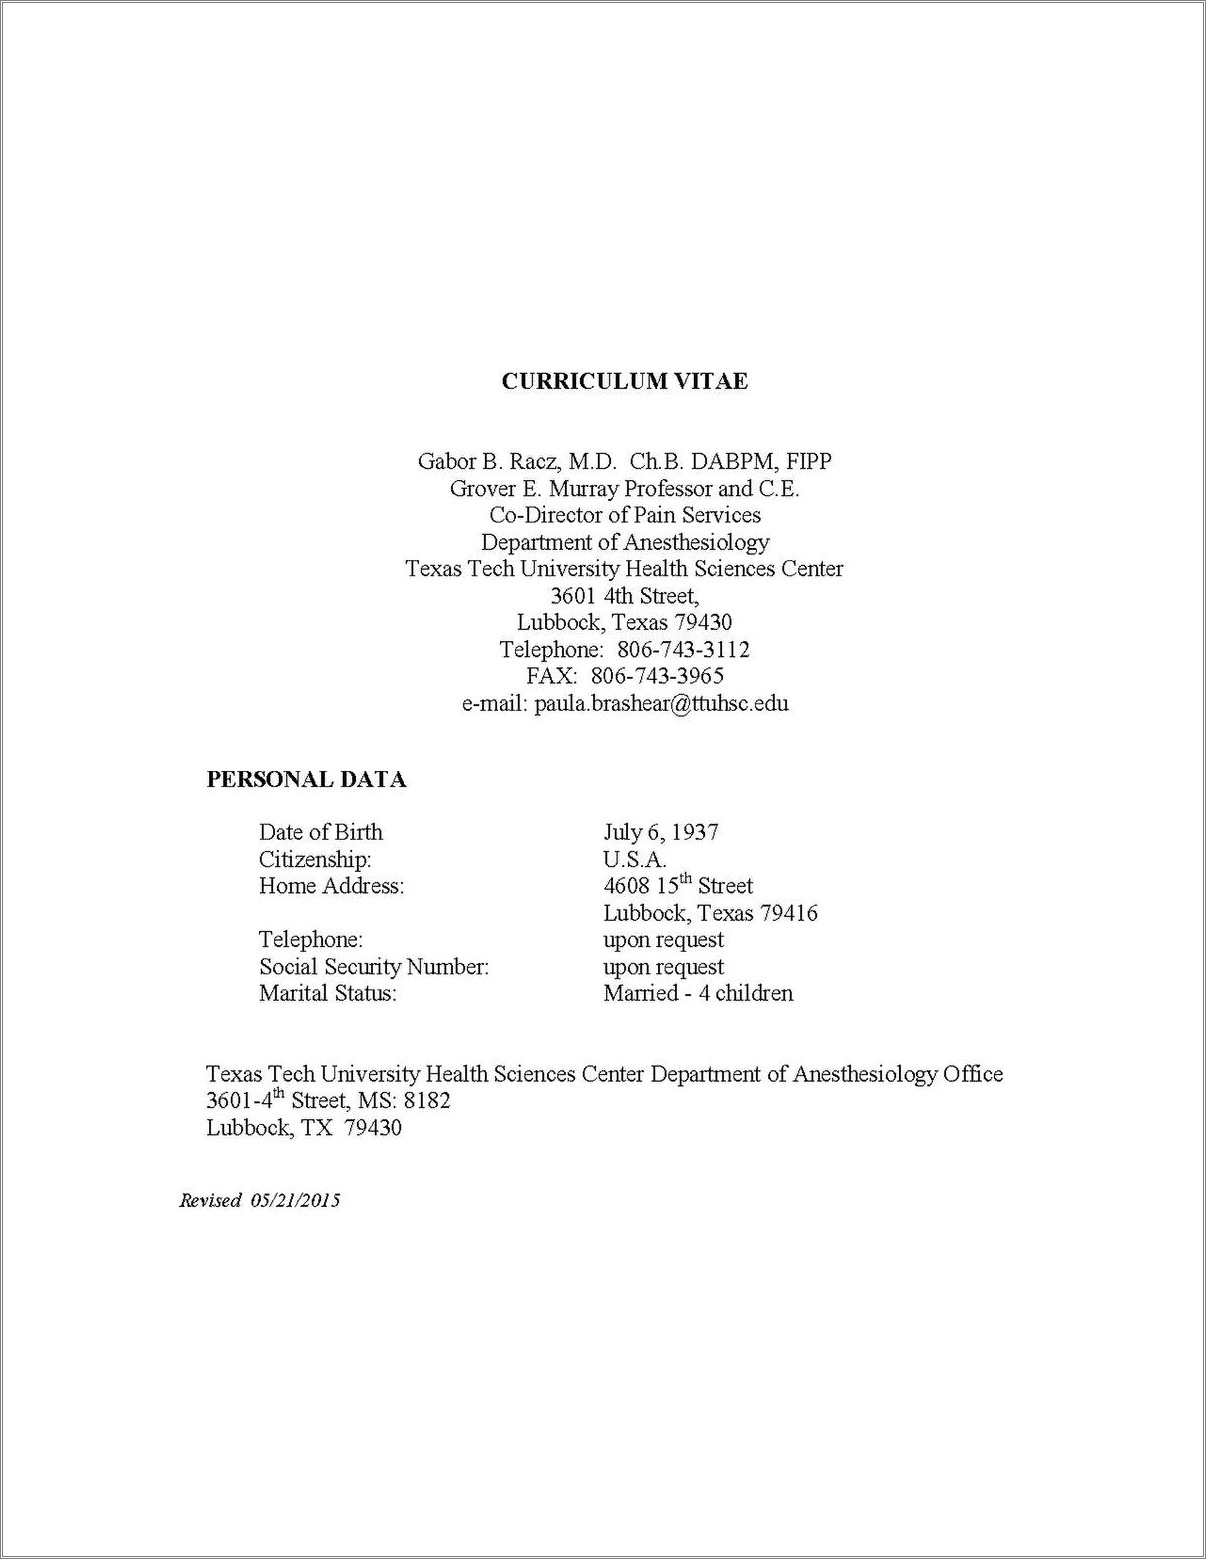 Resume With References Upon Reuest Samples